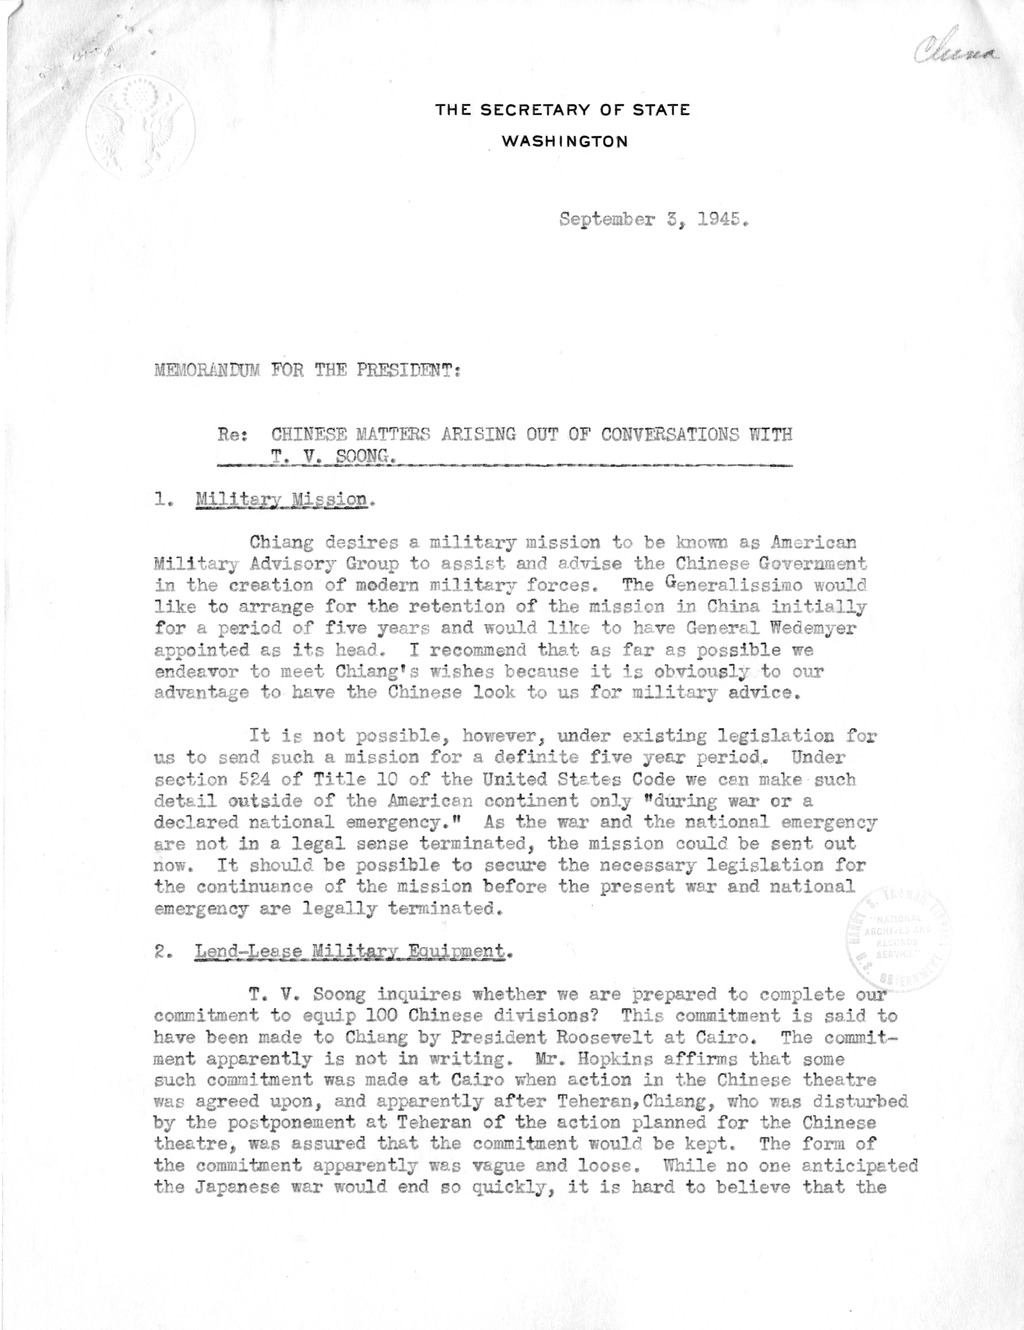 Memoranda from Secretary of State James F. Byrnes and George Elsey to President Harry S. Truman